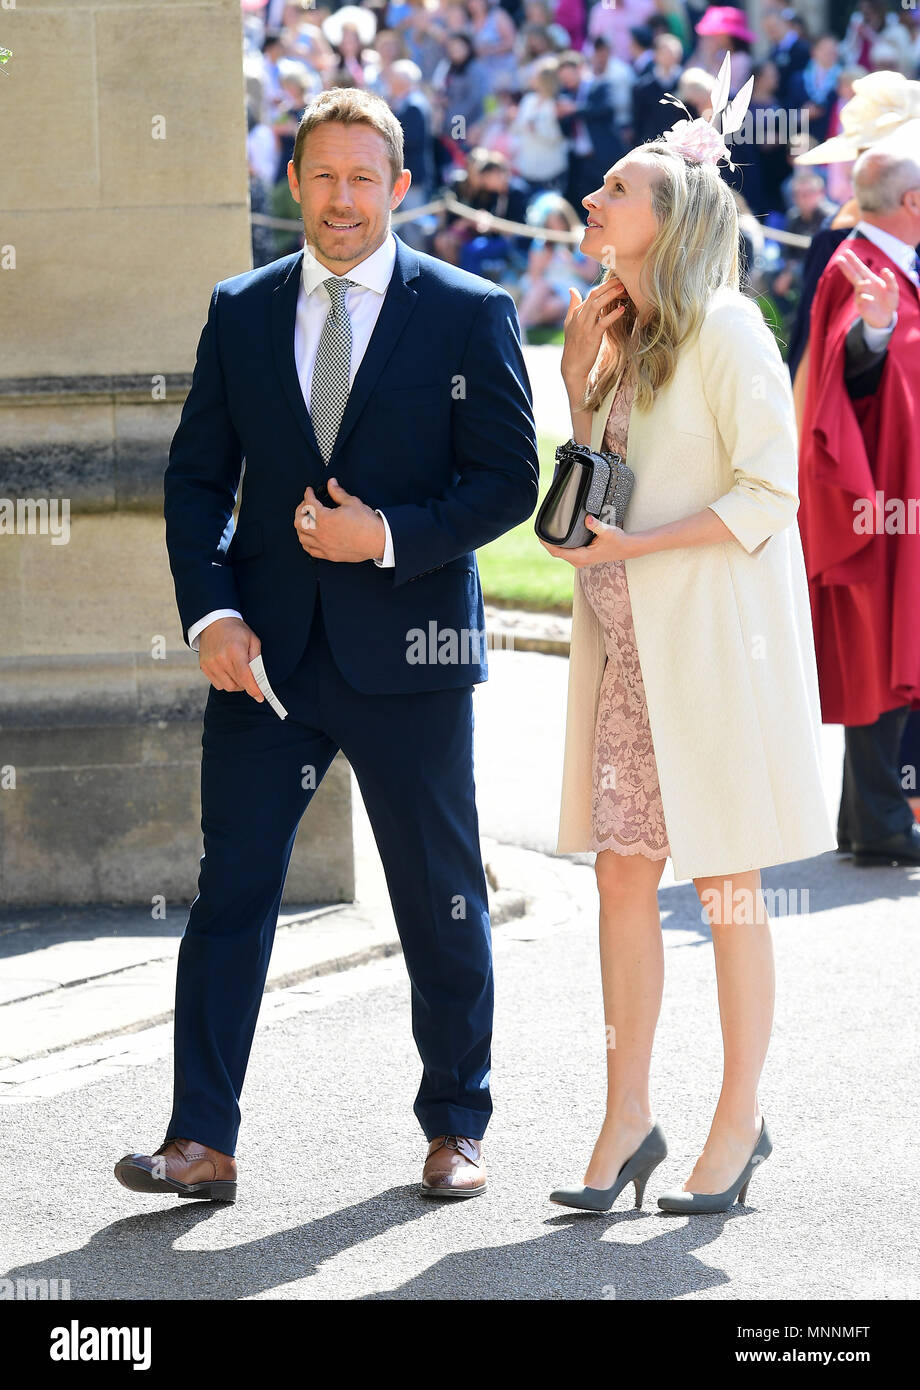 Jonny Wilkinson and Shelley Jenkins arrive at St George's Chapel at Windsor Castle for the wedding of Meghan Markle and Prince Harry. Stock Photo